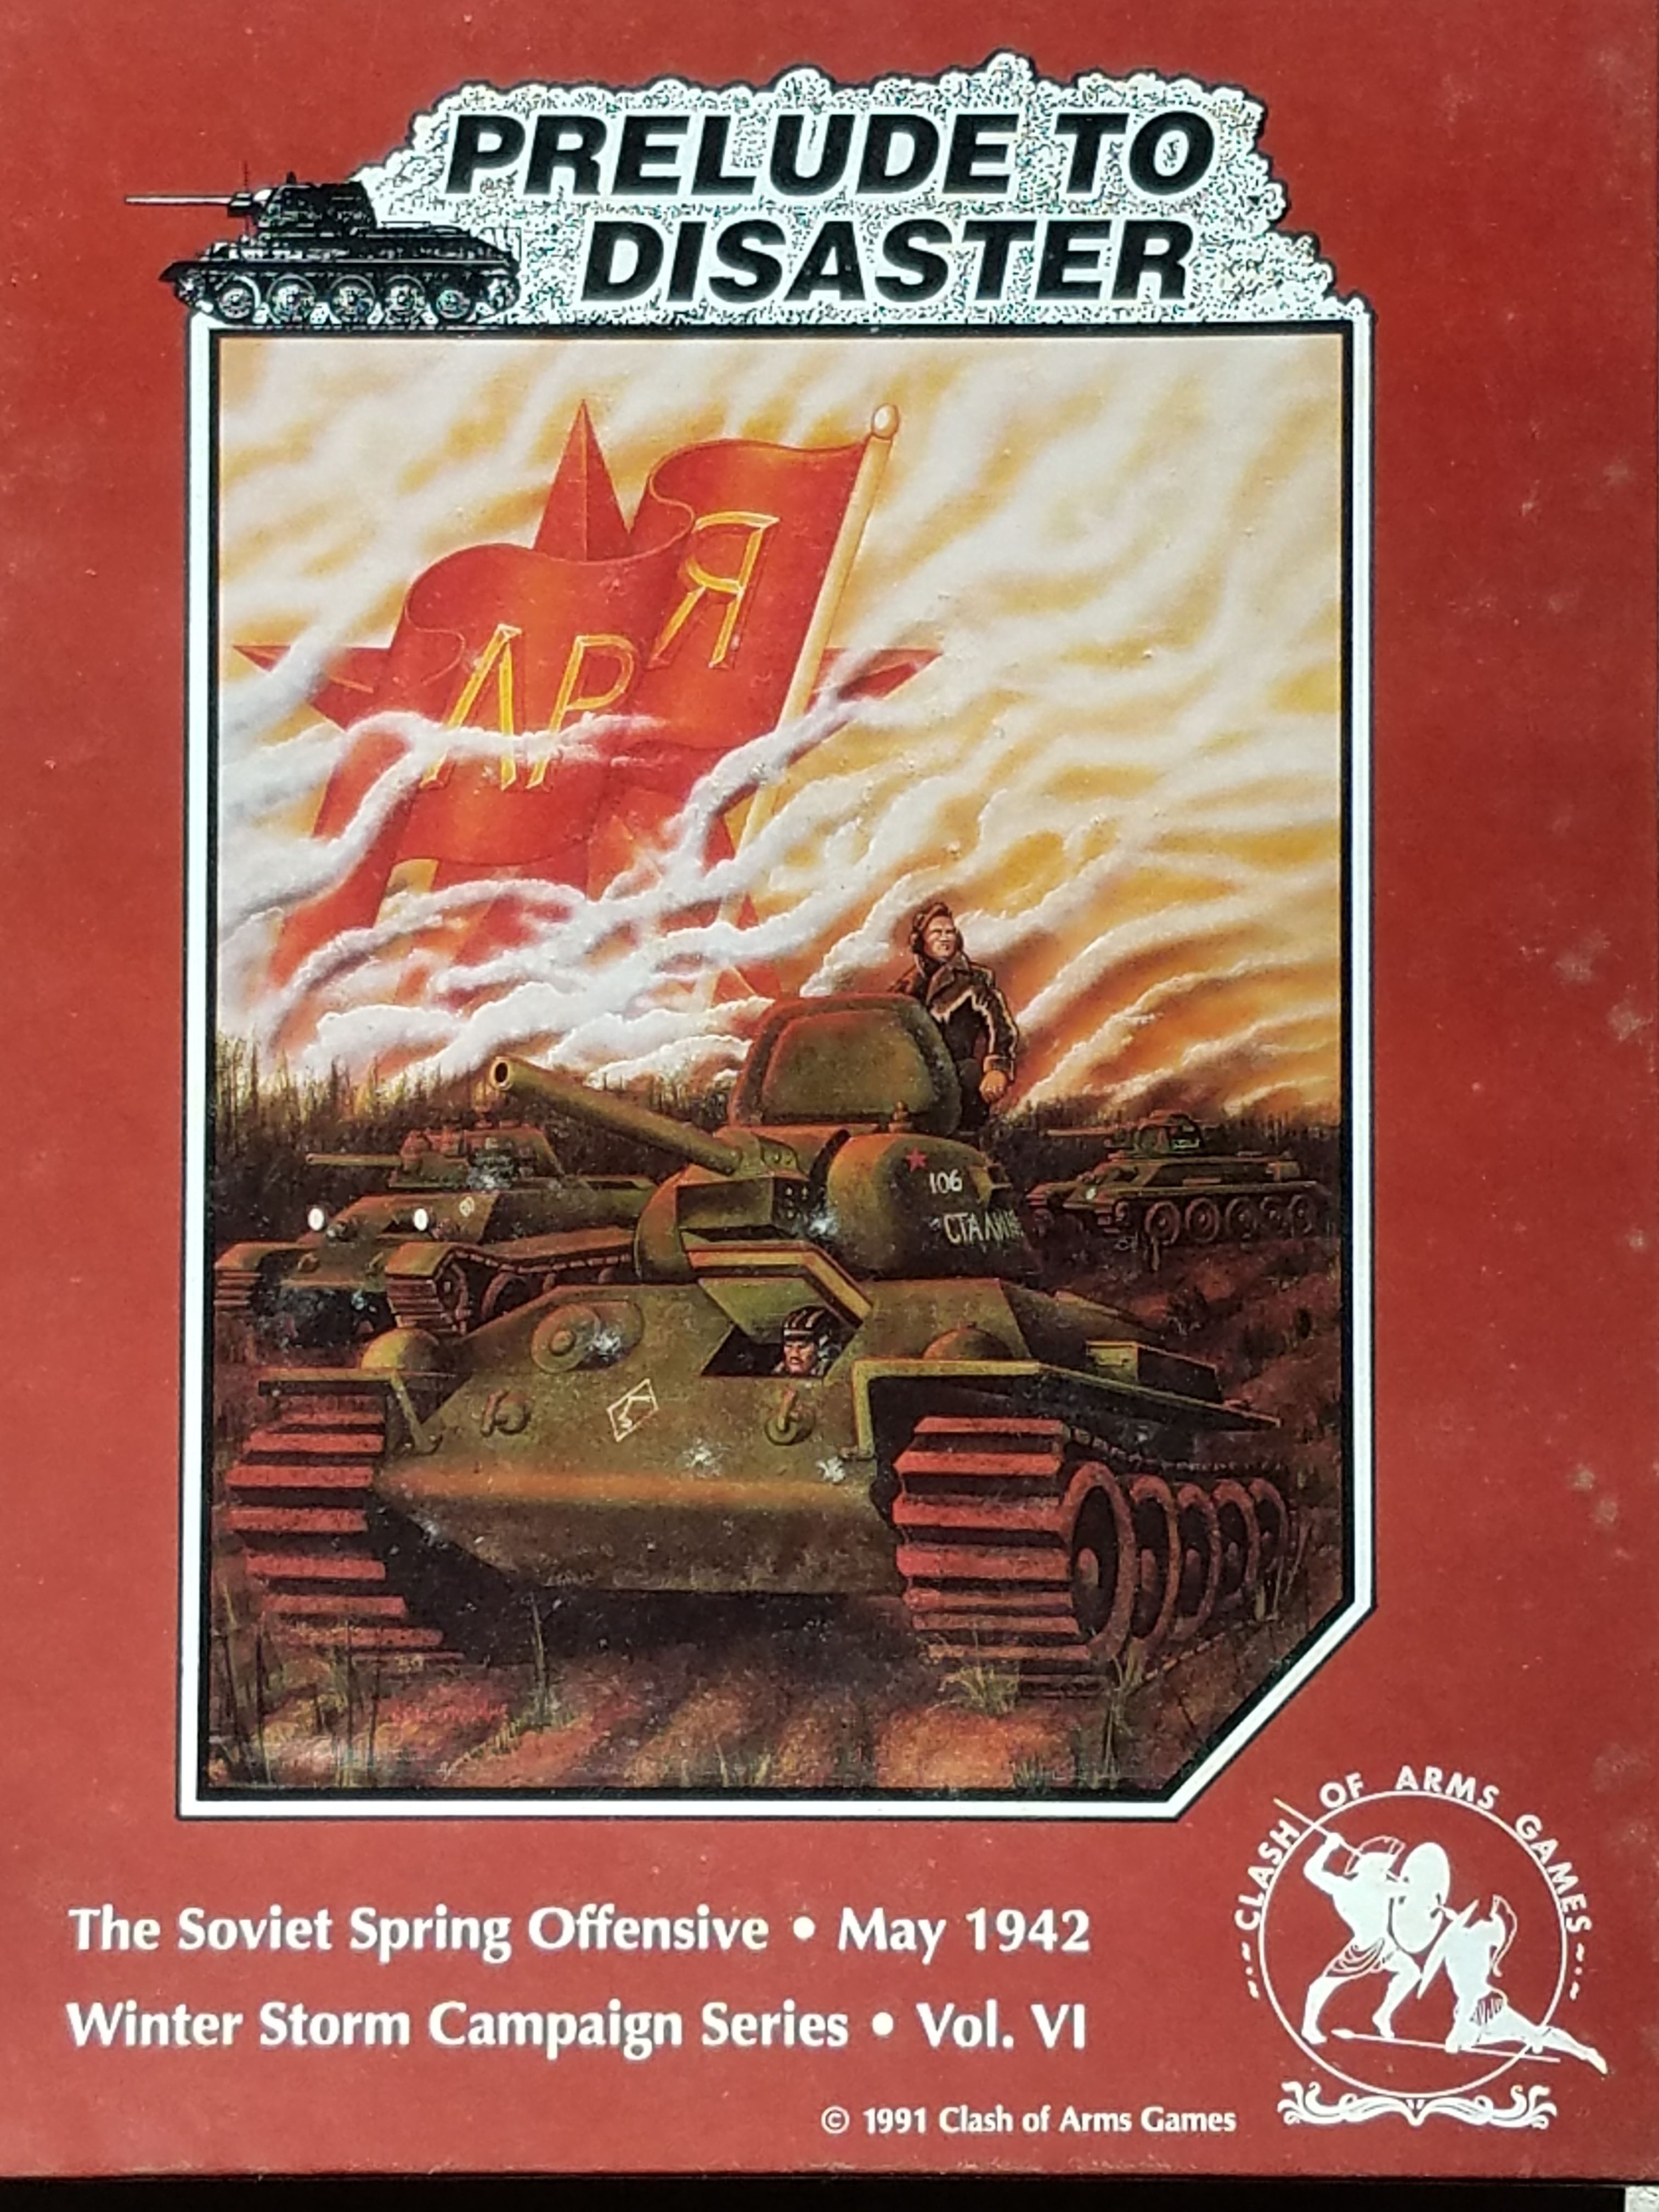 Prelude to Disaster: The Soviet Spring Offensive – May 1942